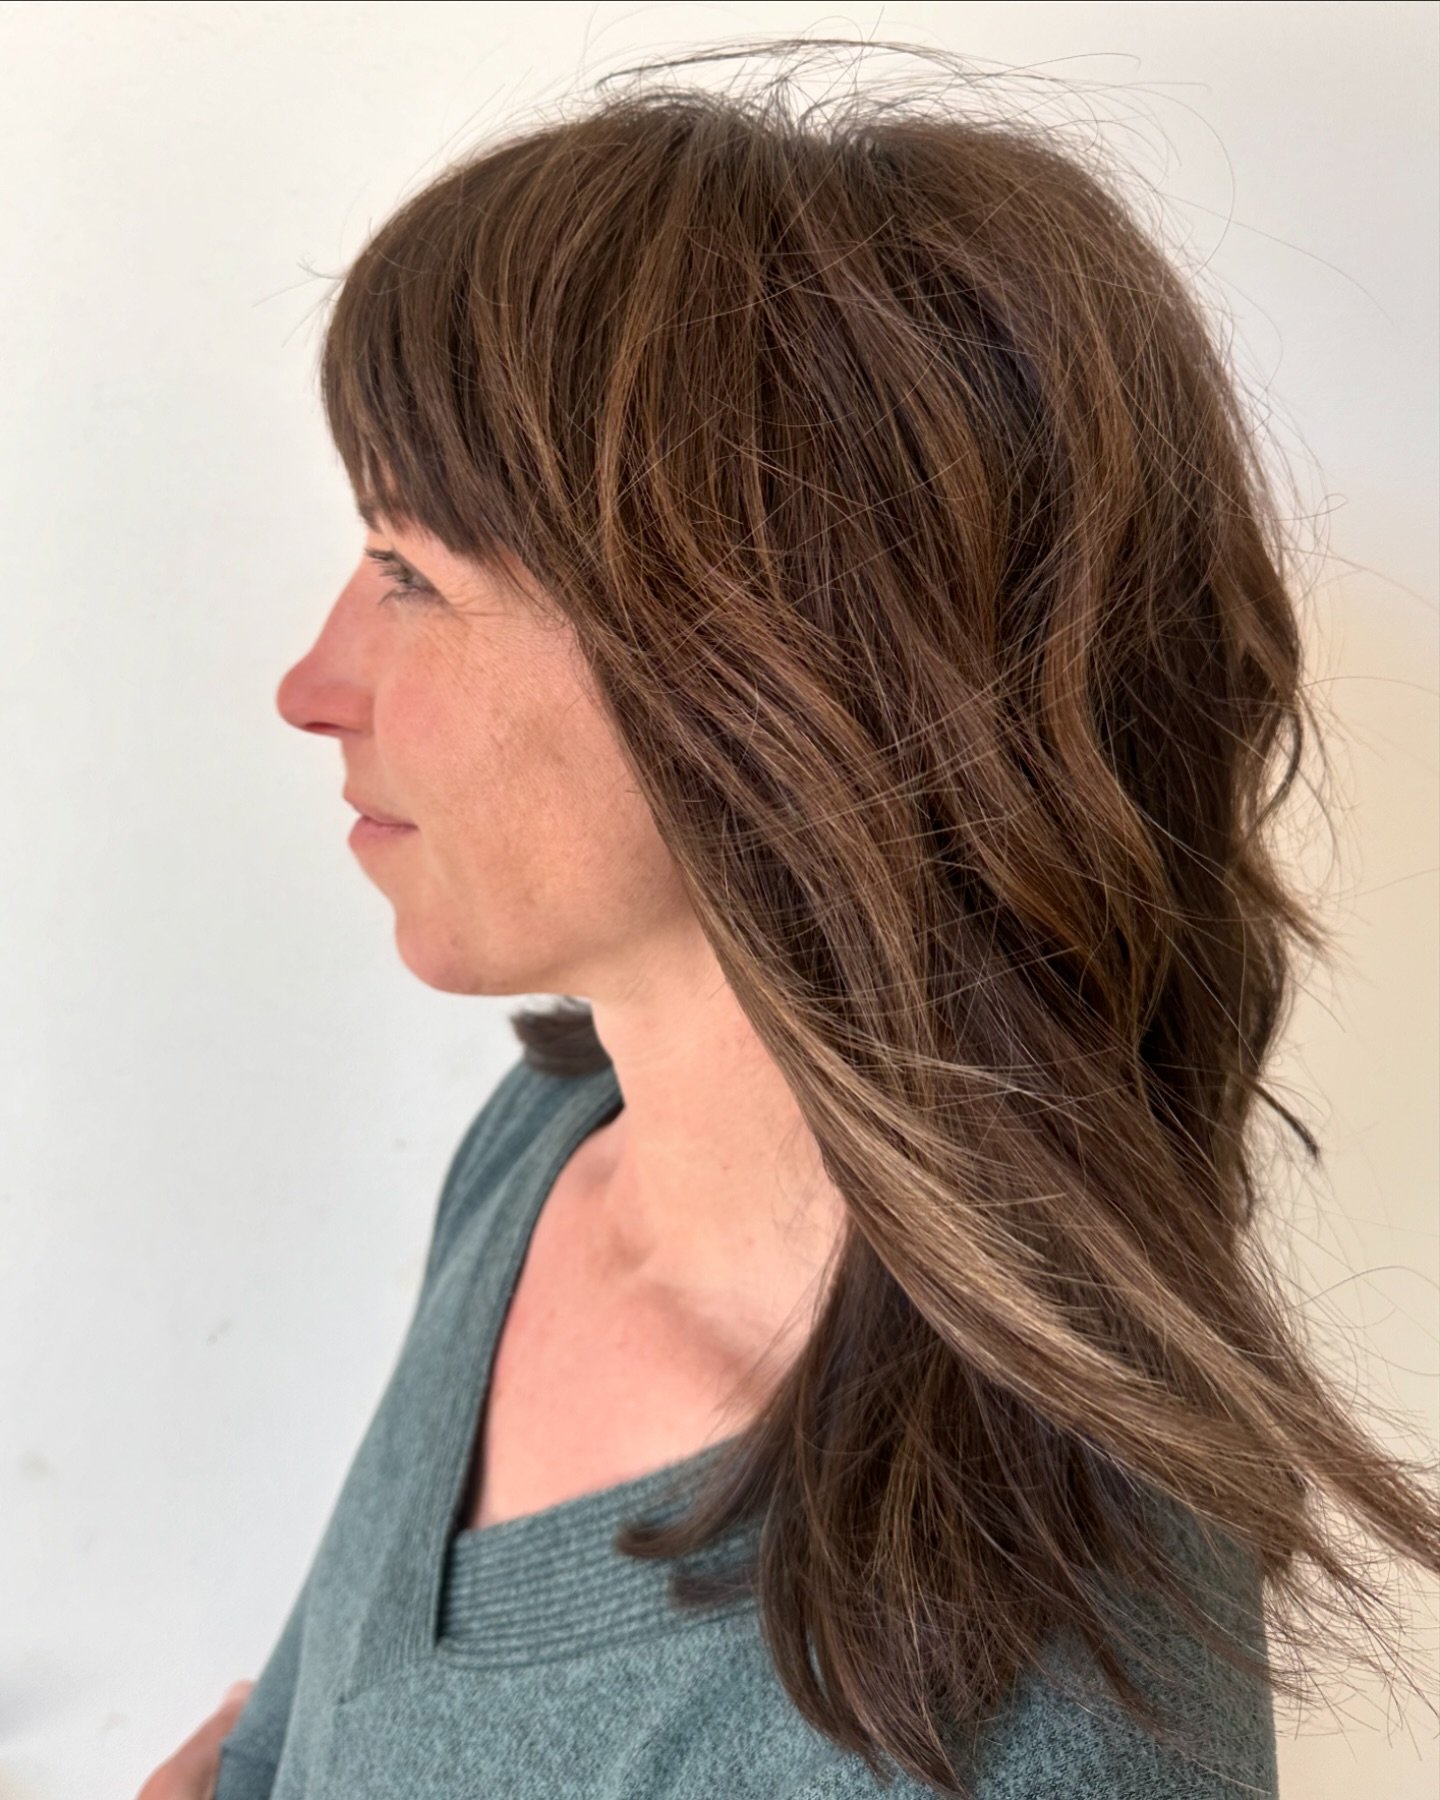 All of this beauty by @emily_rishavy_hair_ ✨

Spring may be teasing us with the wind lately but boy does it work well with hair! 

#loticsalon #salidacolorado #salidacoloradohairsalon #salidacoloradostylist